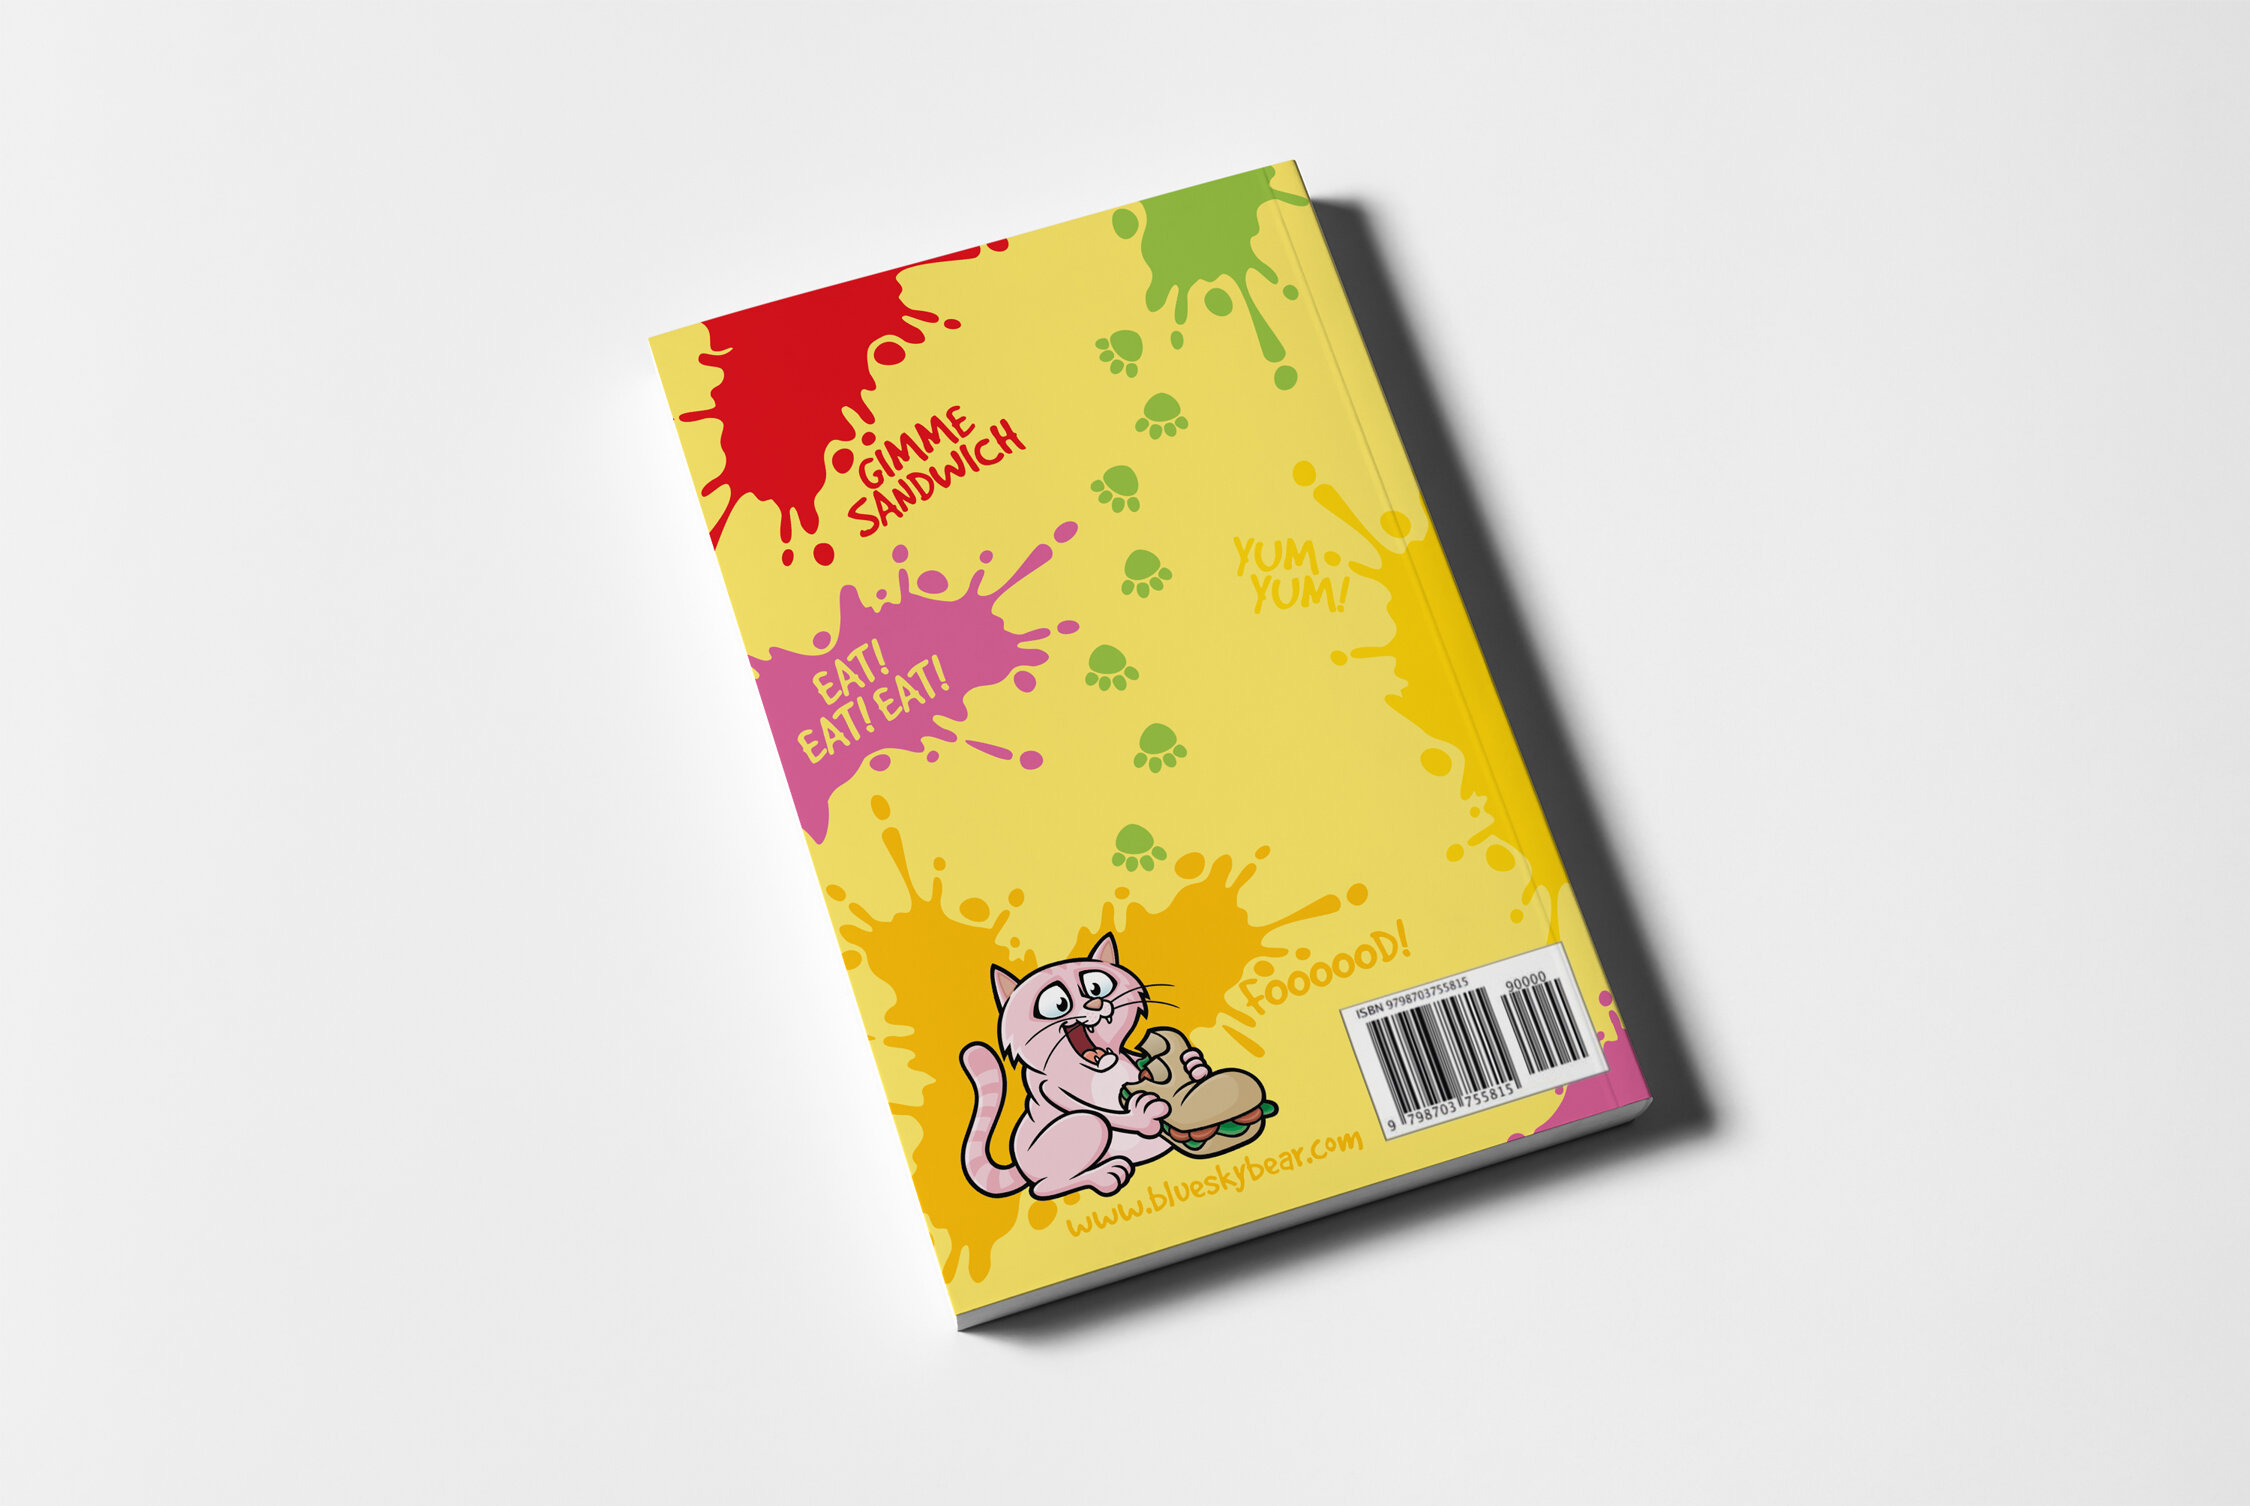 6x9-CatAlwaysHungry-Notebook-Mockup-BackCover-01.jpg